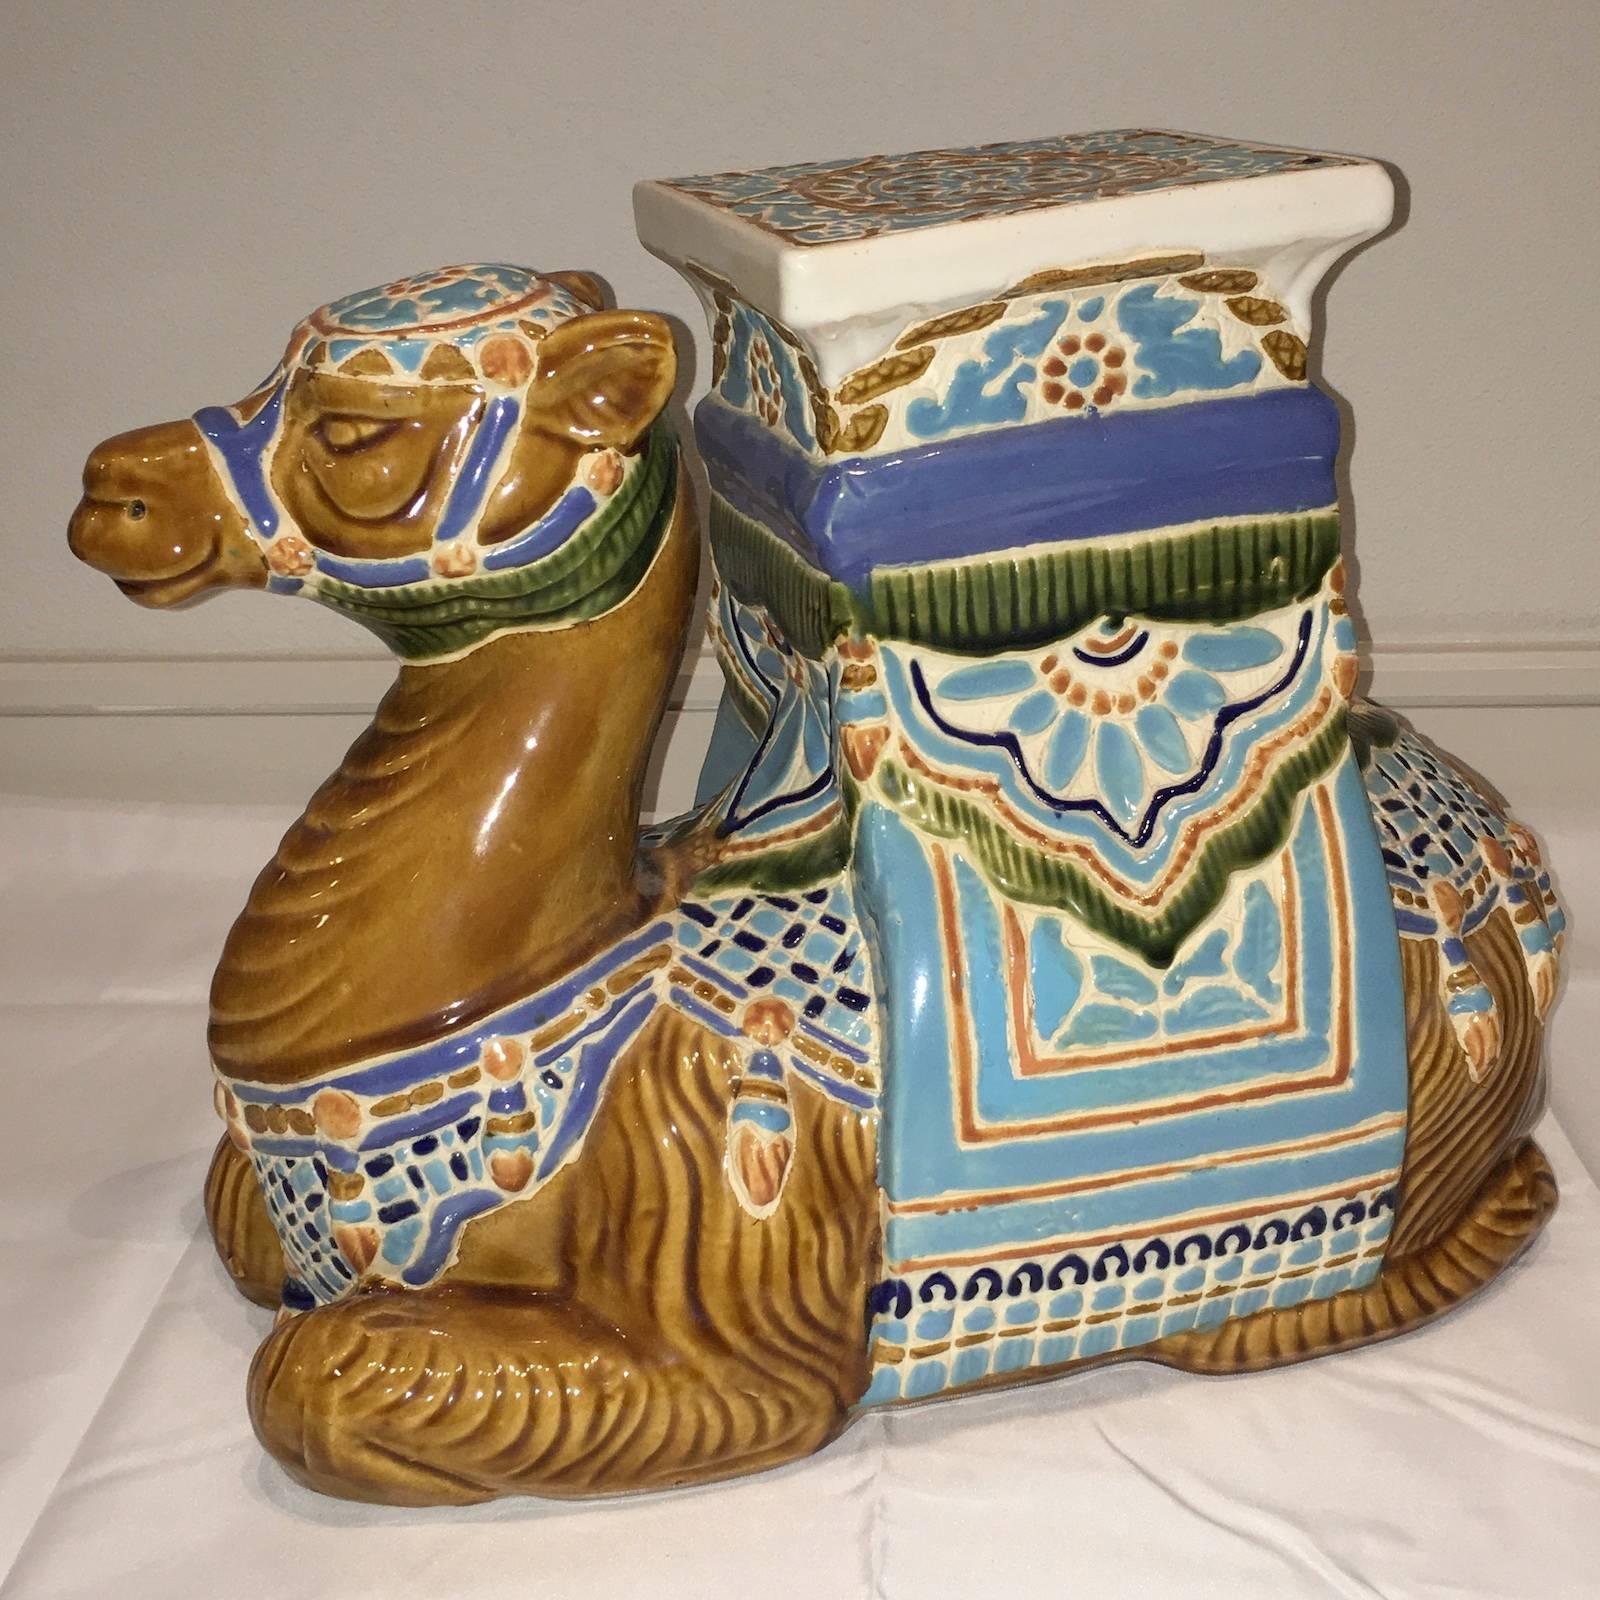 Mid-20th century glazed ceramic camel garden stool, flower pot seat or side table. Handmade of ceramic. Nice addition to your home, patio or garden.